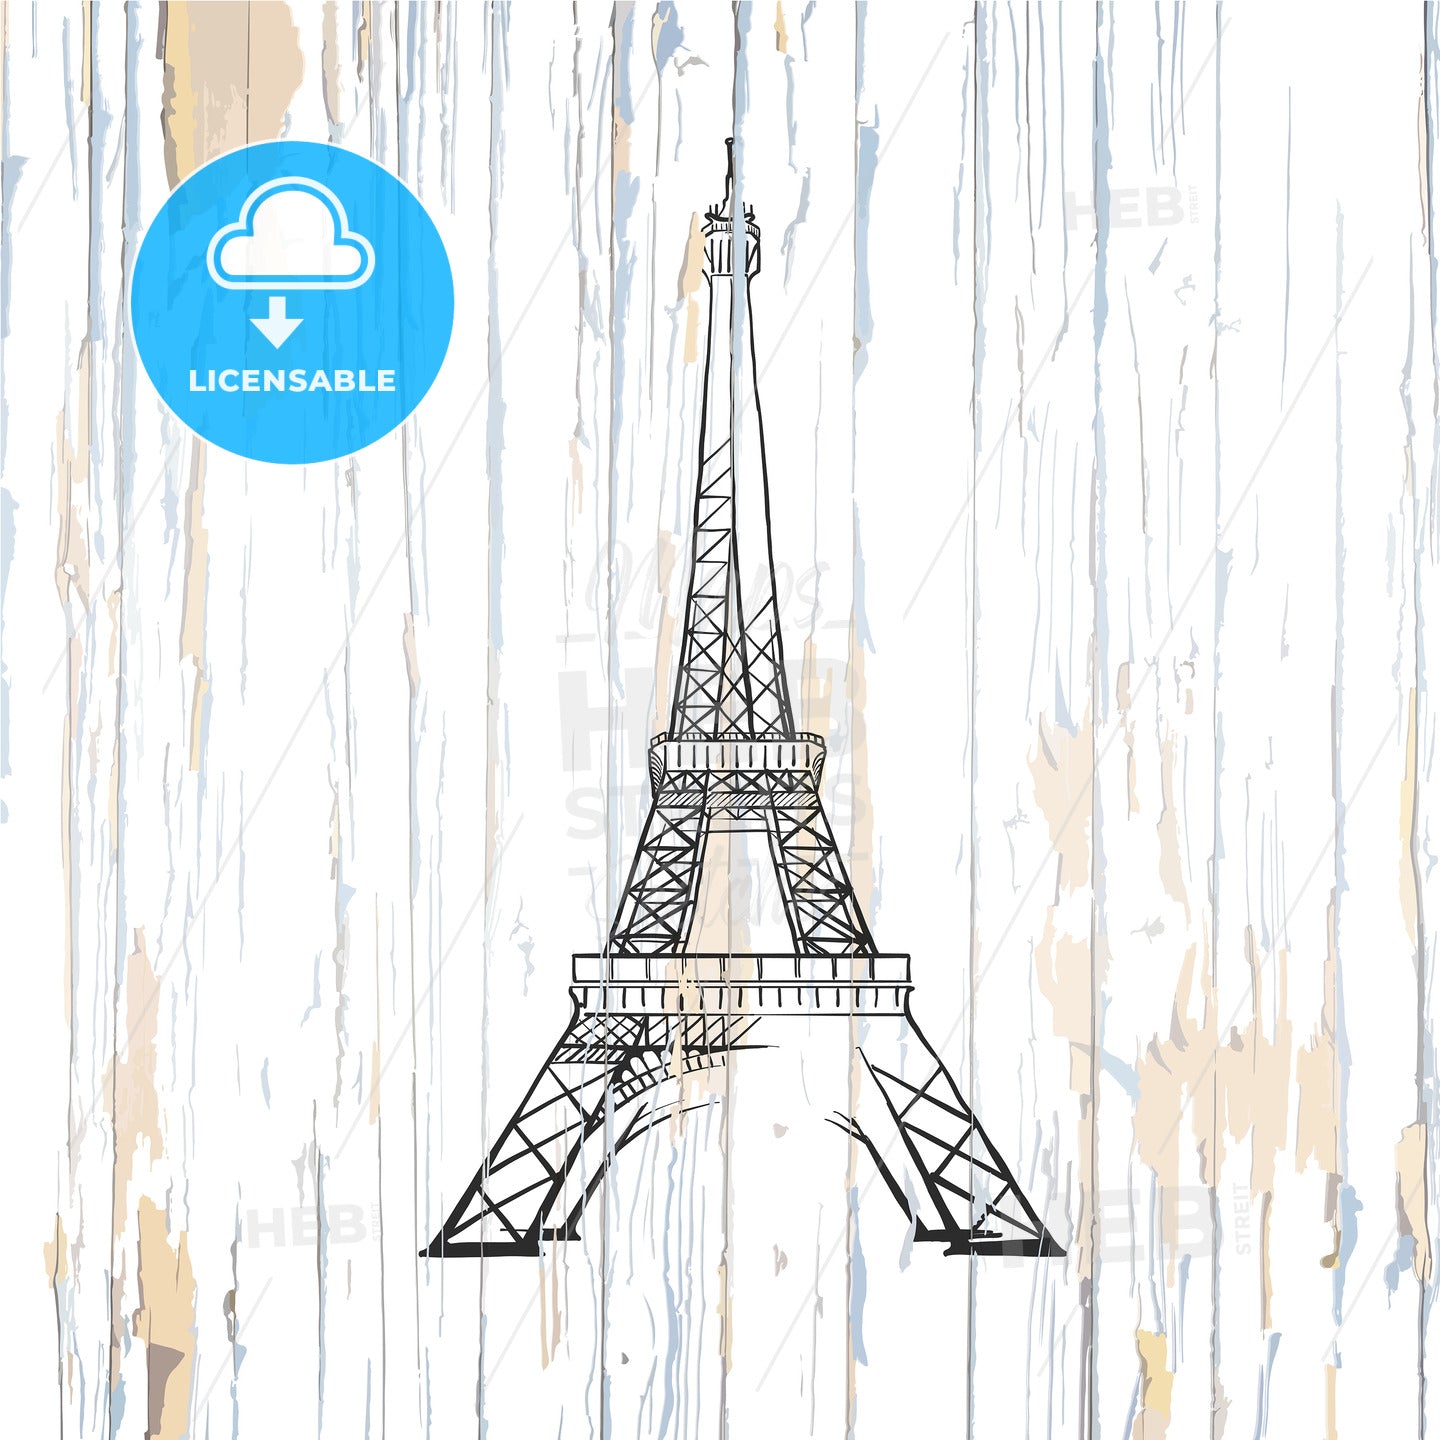 Eiffel tower drawing on wood – instant download